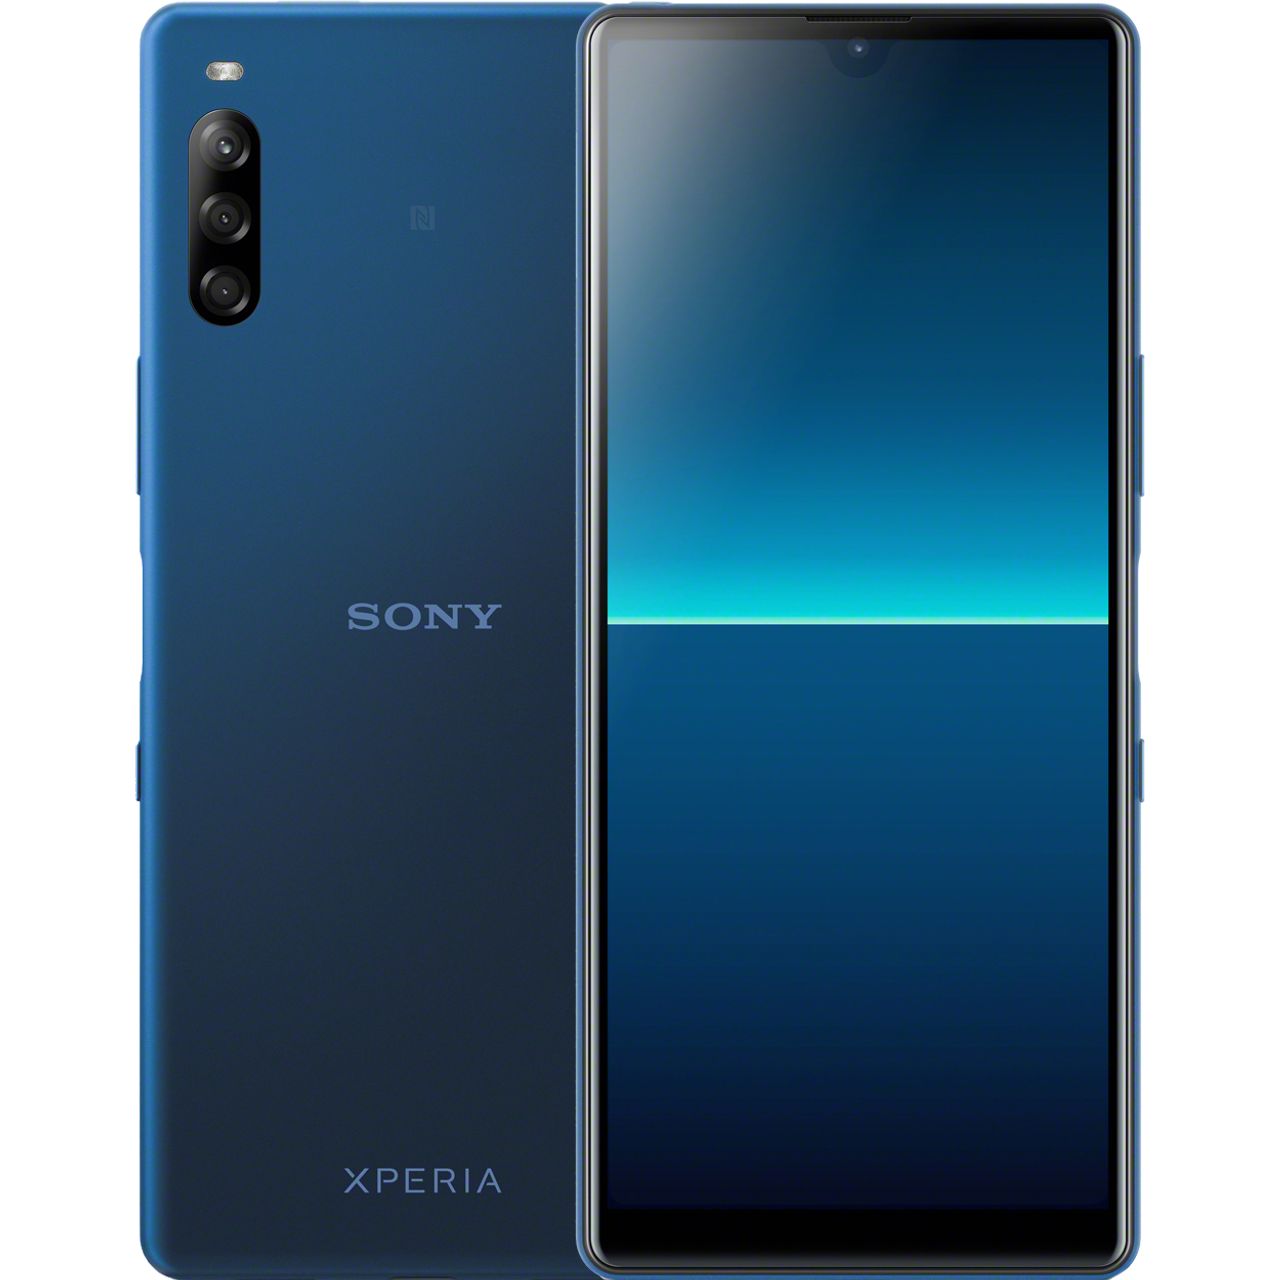 Sony Xperia L4 Smartphone in Blue Review